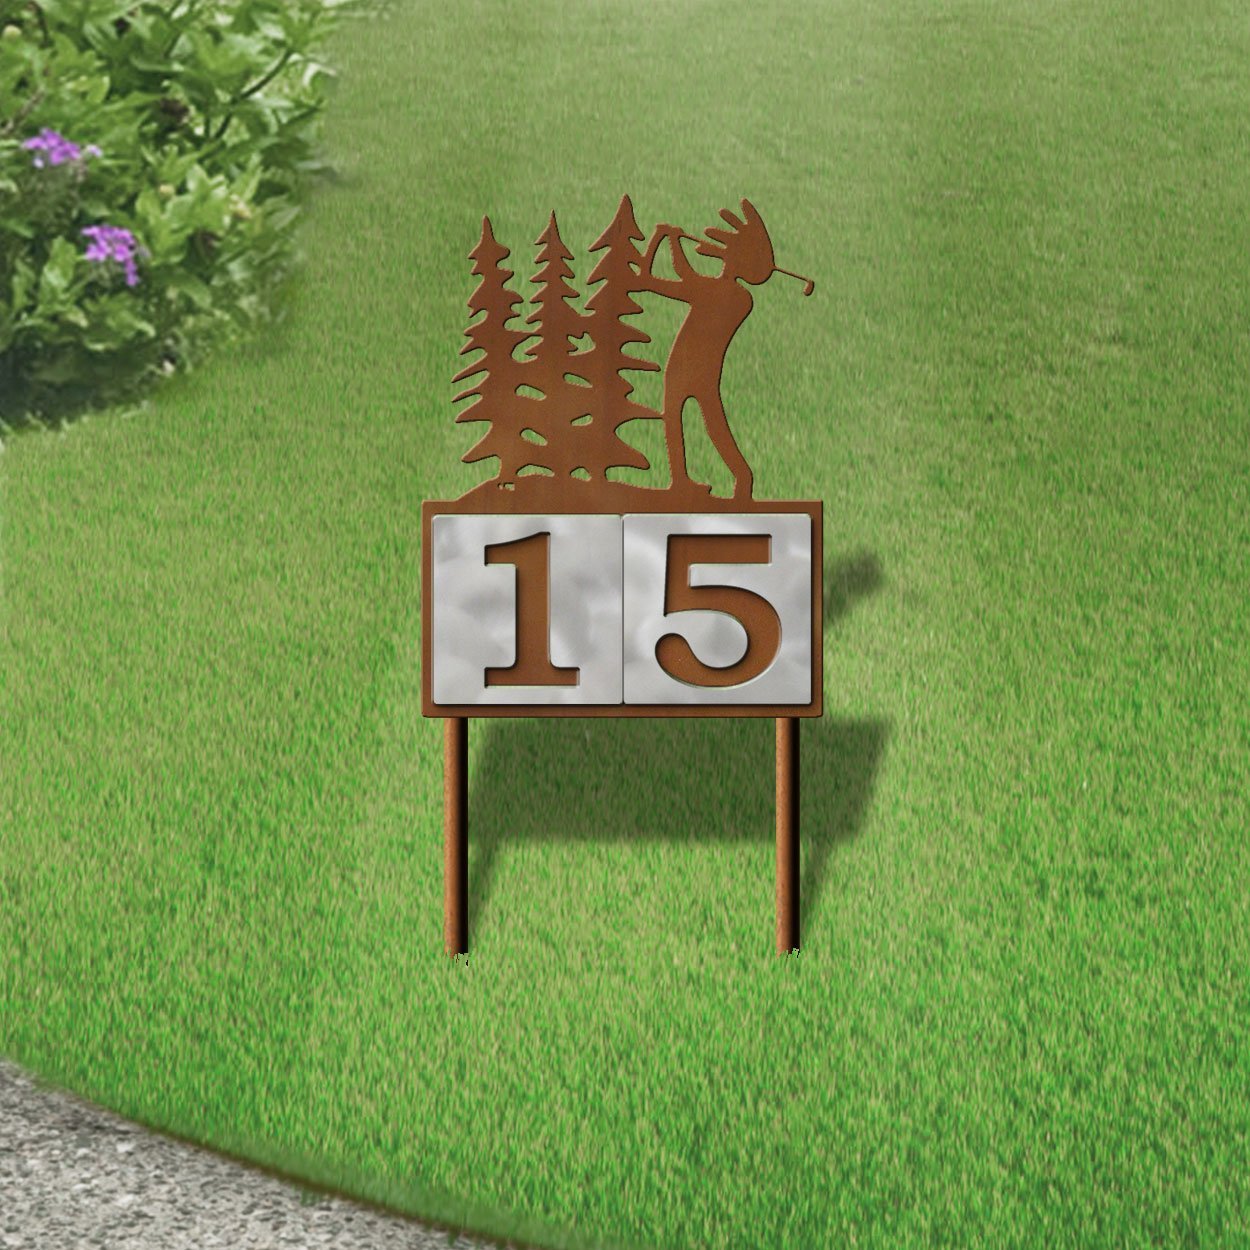 610142 - Kokopelli Golfer in the Woods Design 2-Digit Horizontal 6-inch Tile Outdoor House Numbers Yard Sign